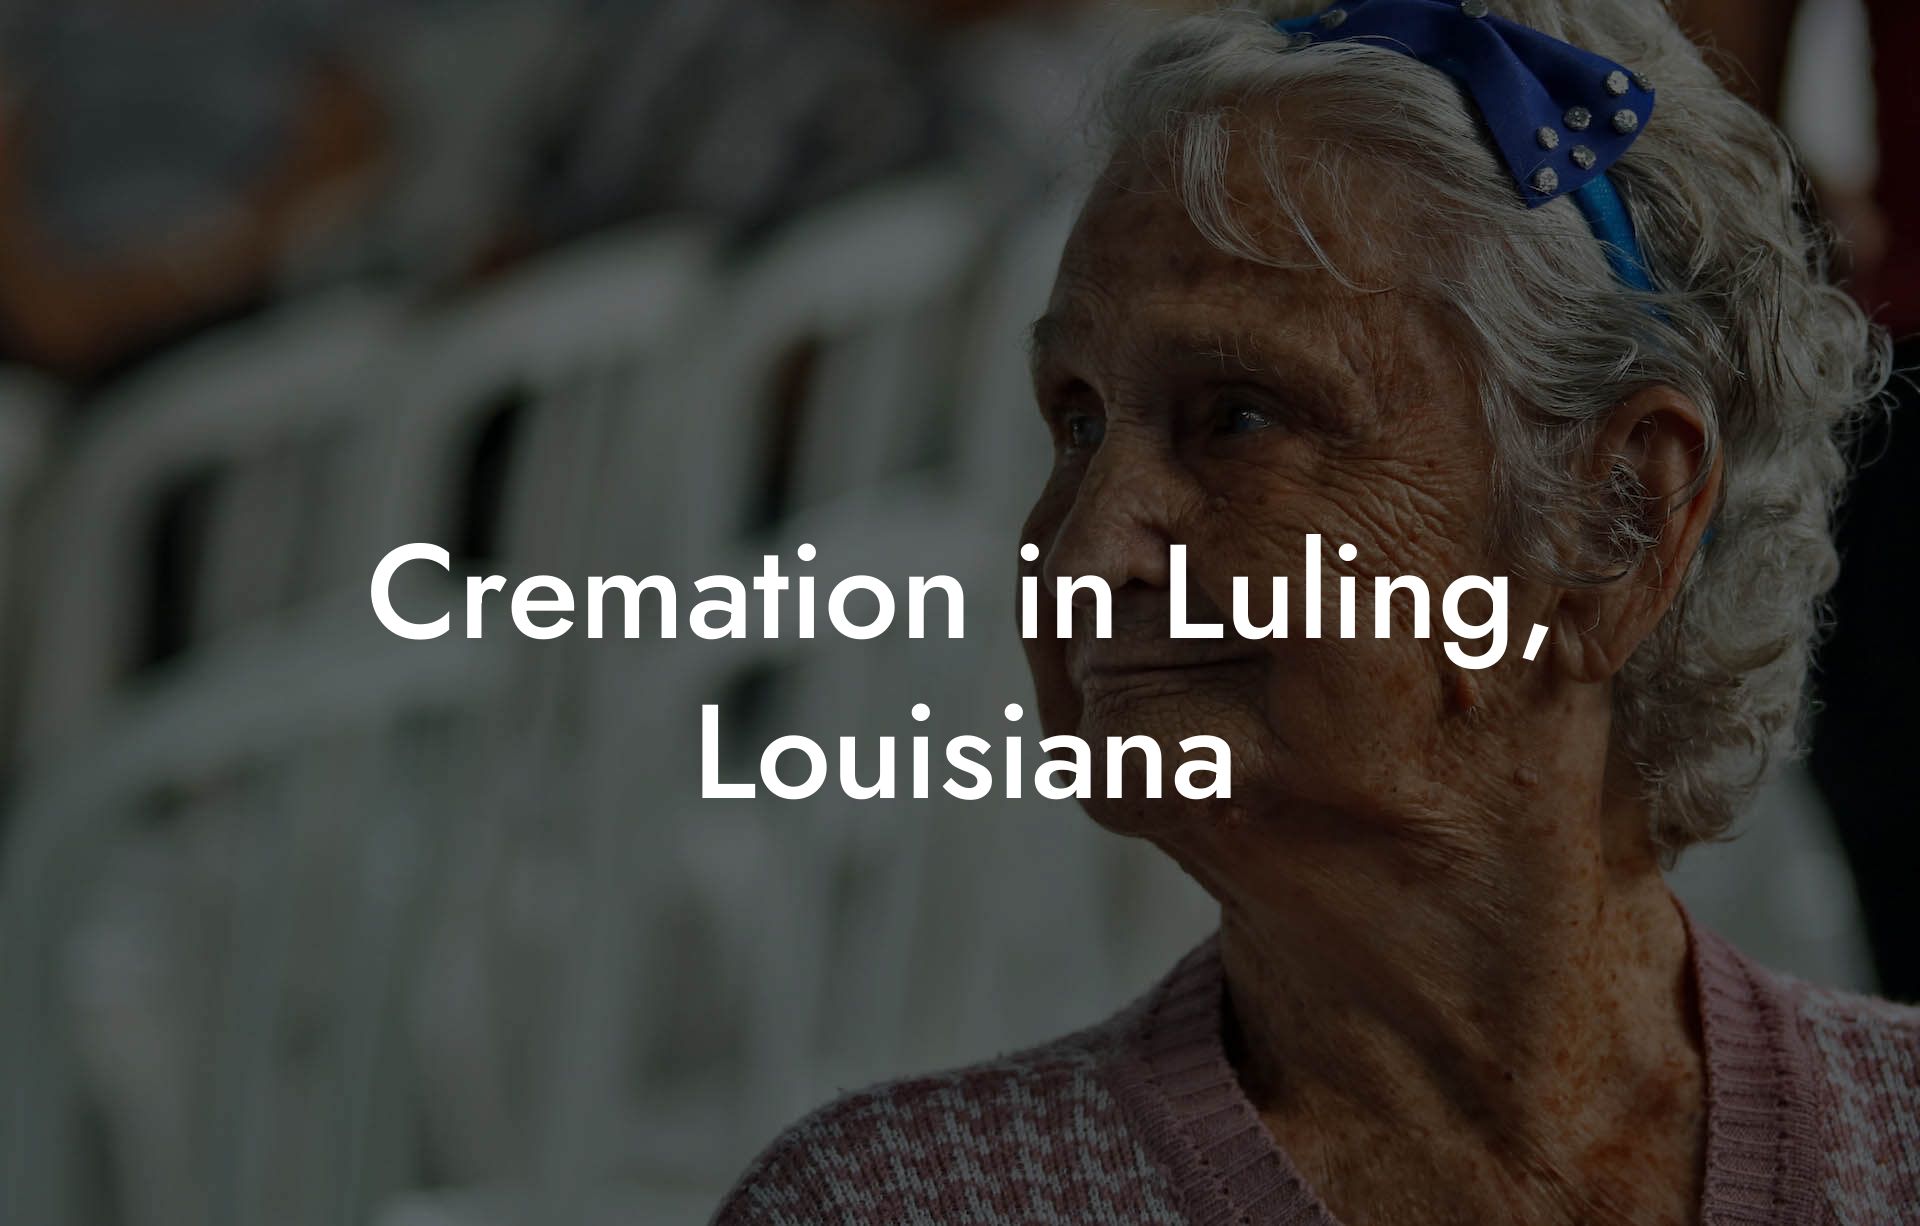 Cremation in Luling, Louisiana